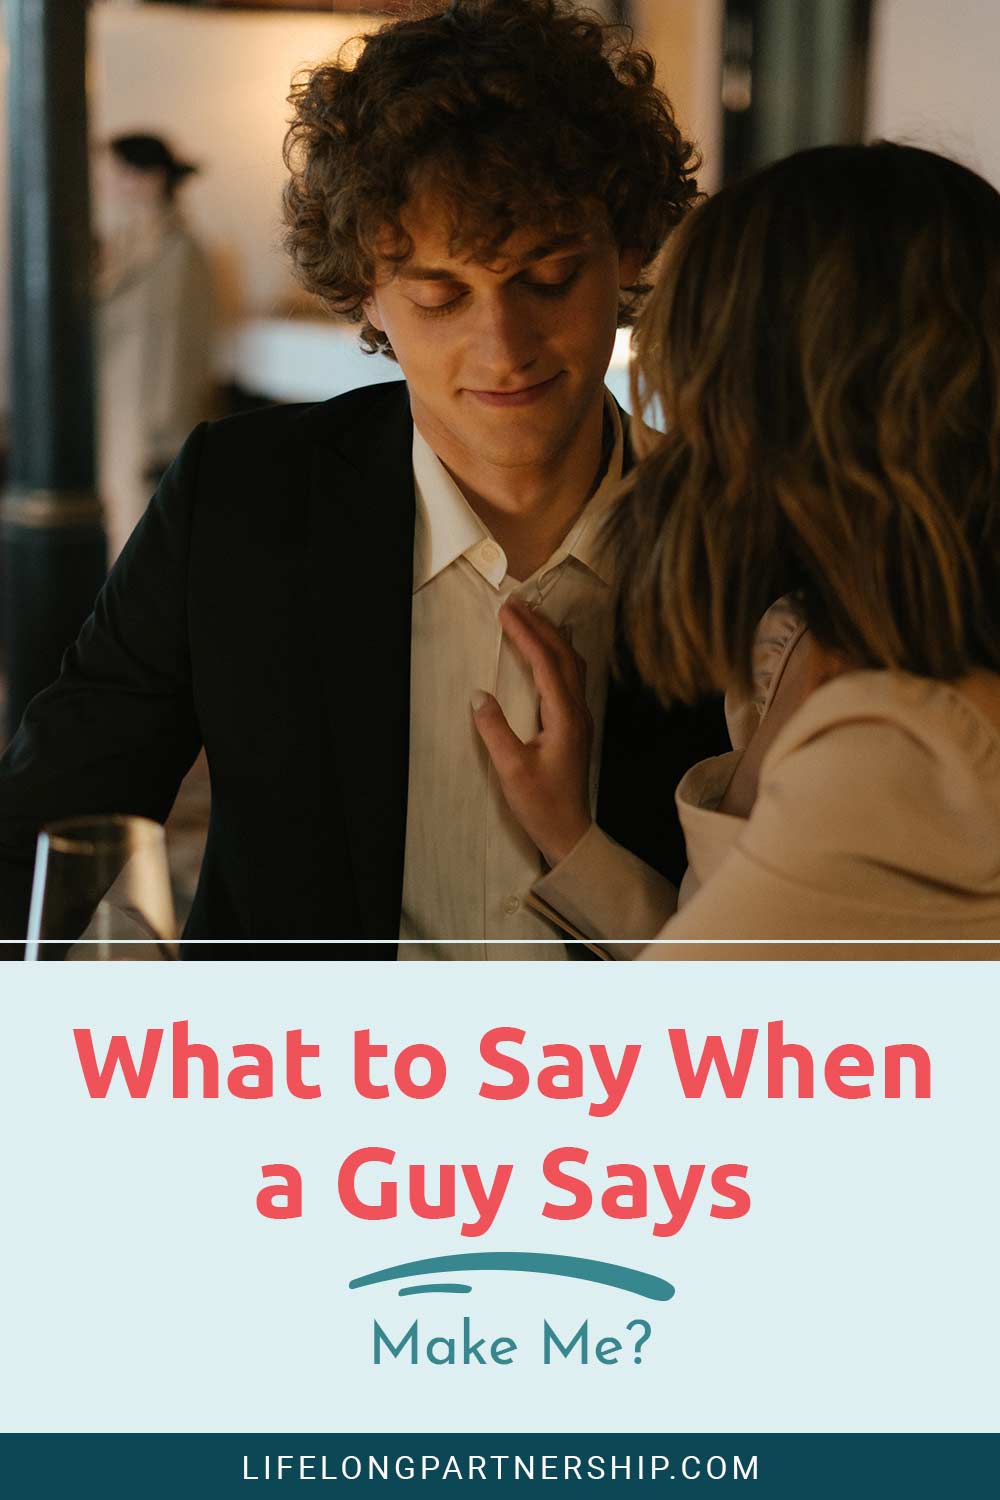 Man's eyes closed when woman's hand is on his chest - What to Say When a Guy Says Make Me?